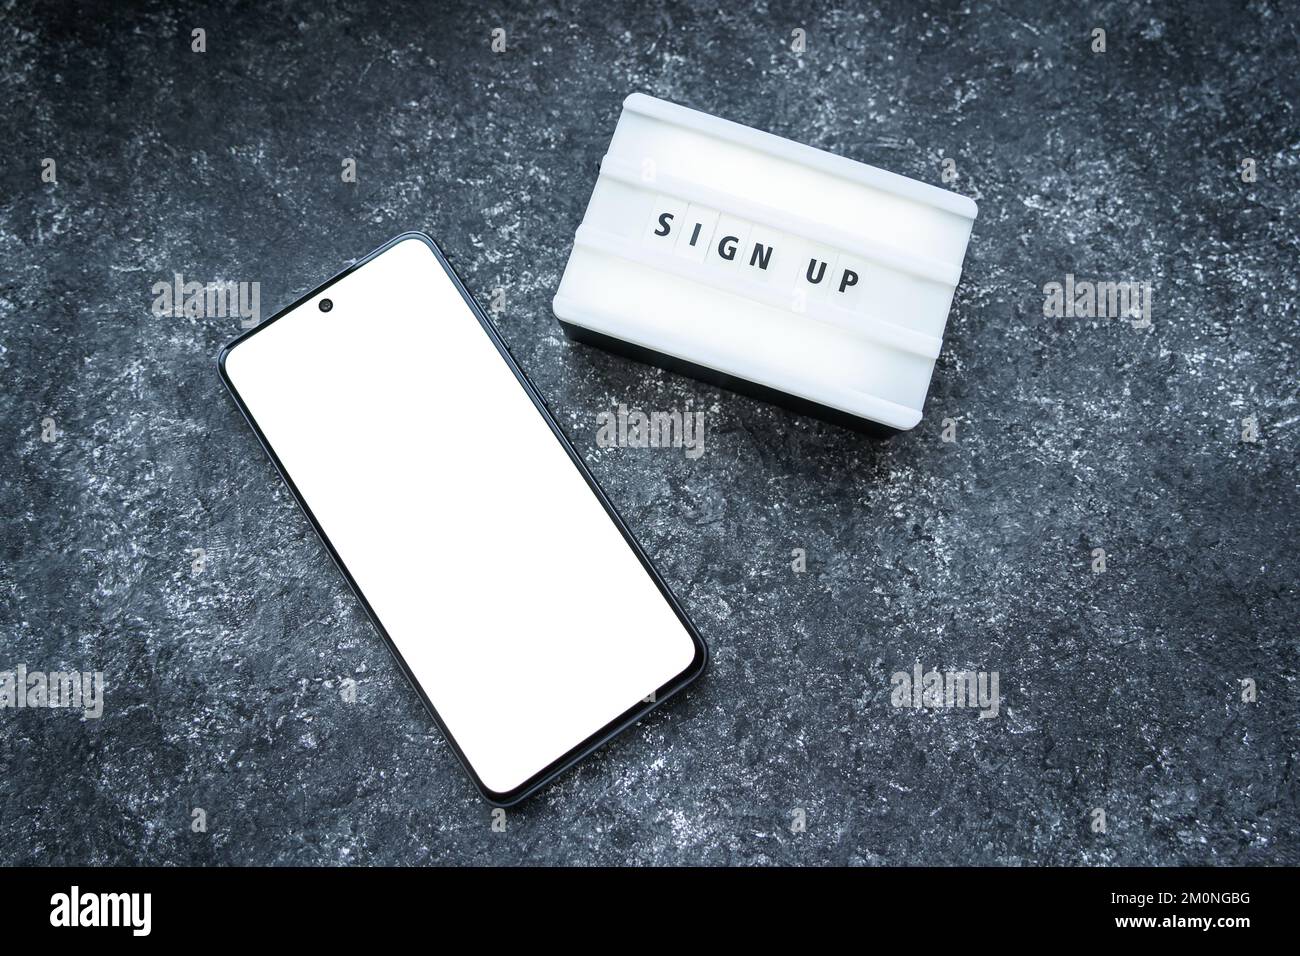 Black smartphone with blank white mockup screen and Sign up text on light box with letters on dark concrete background. Stock Photo